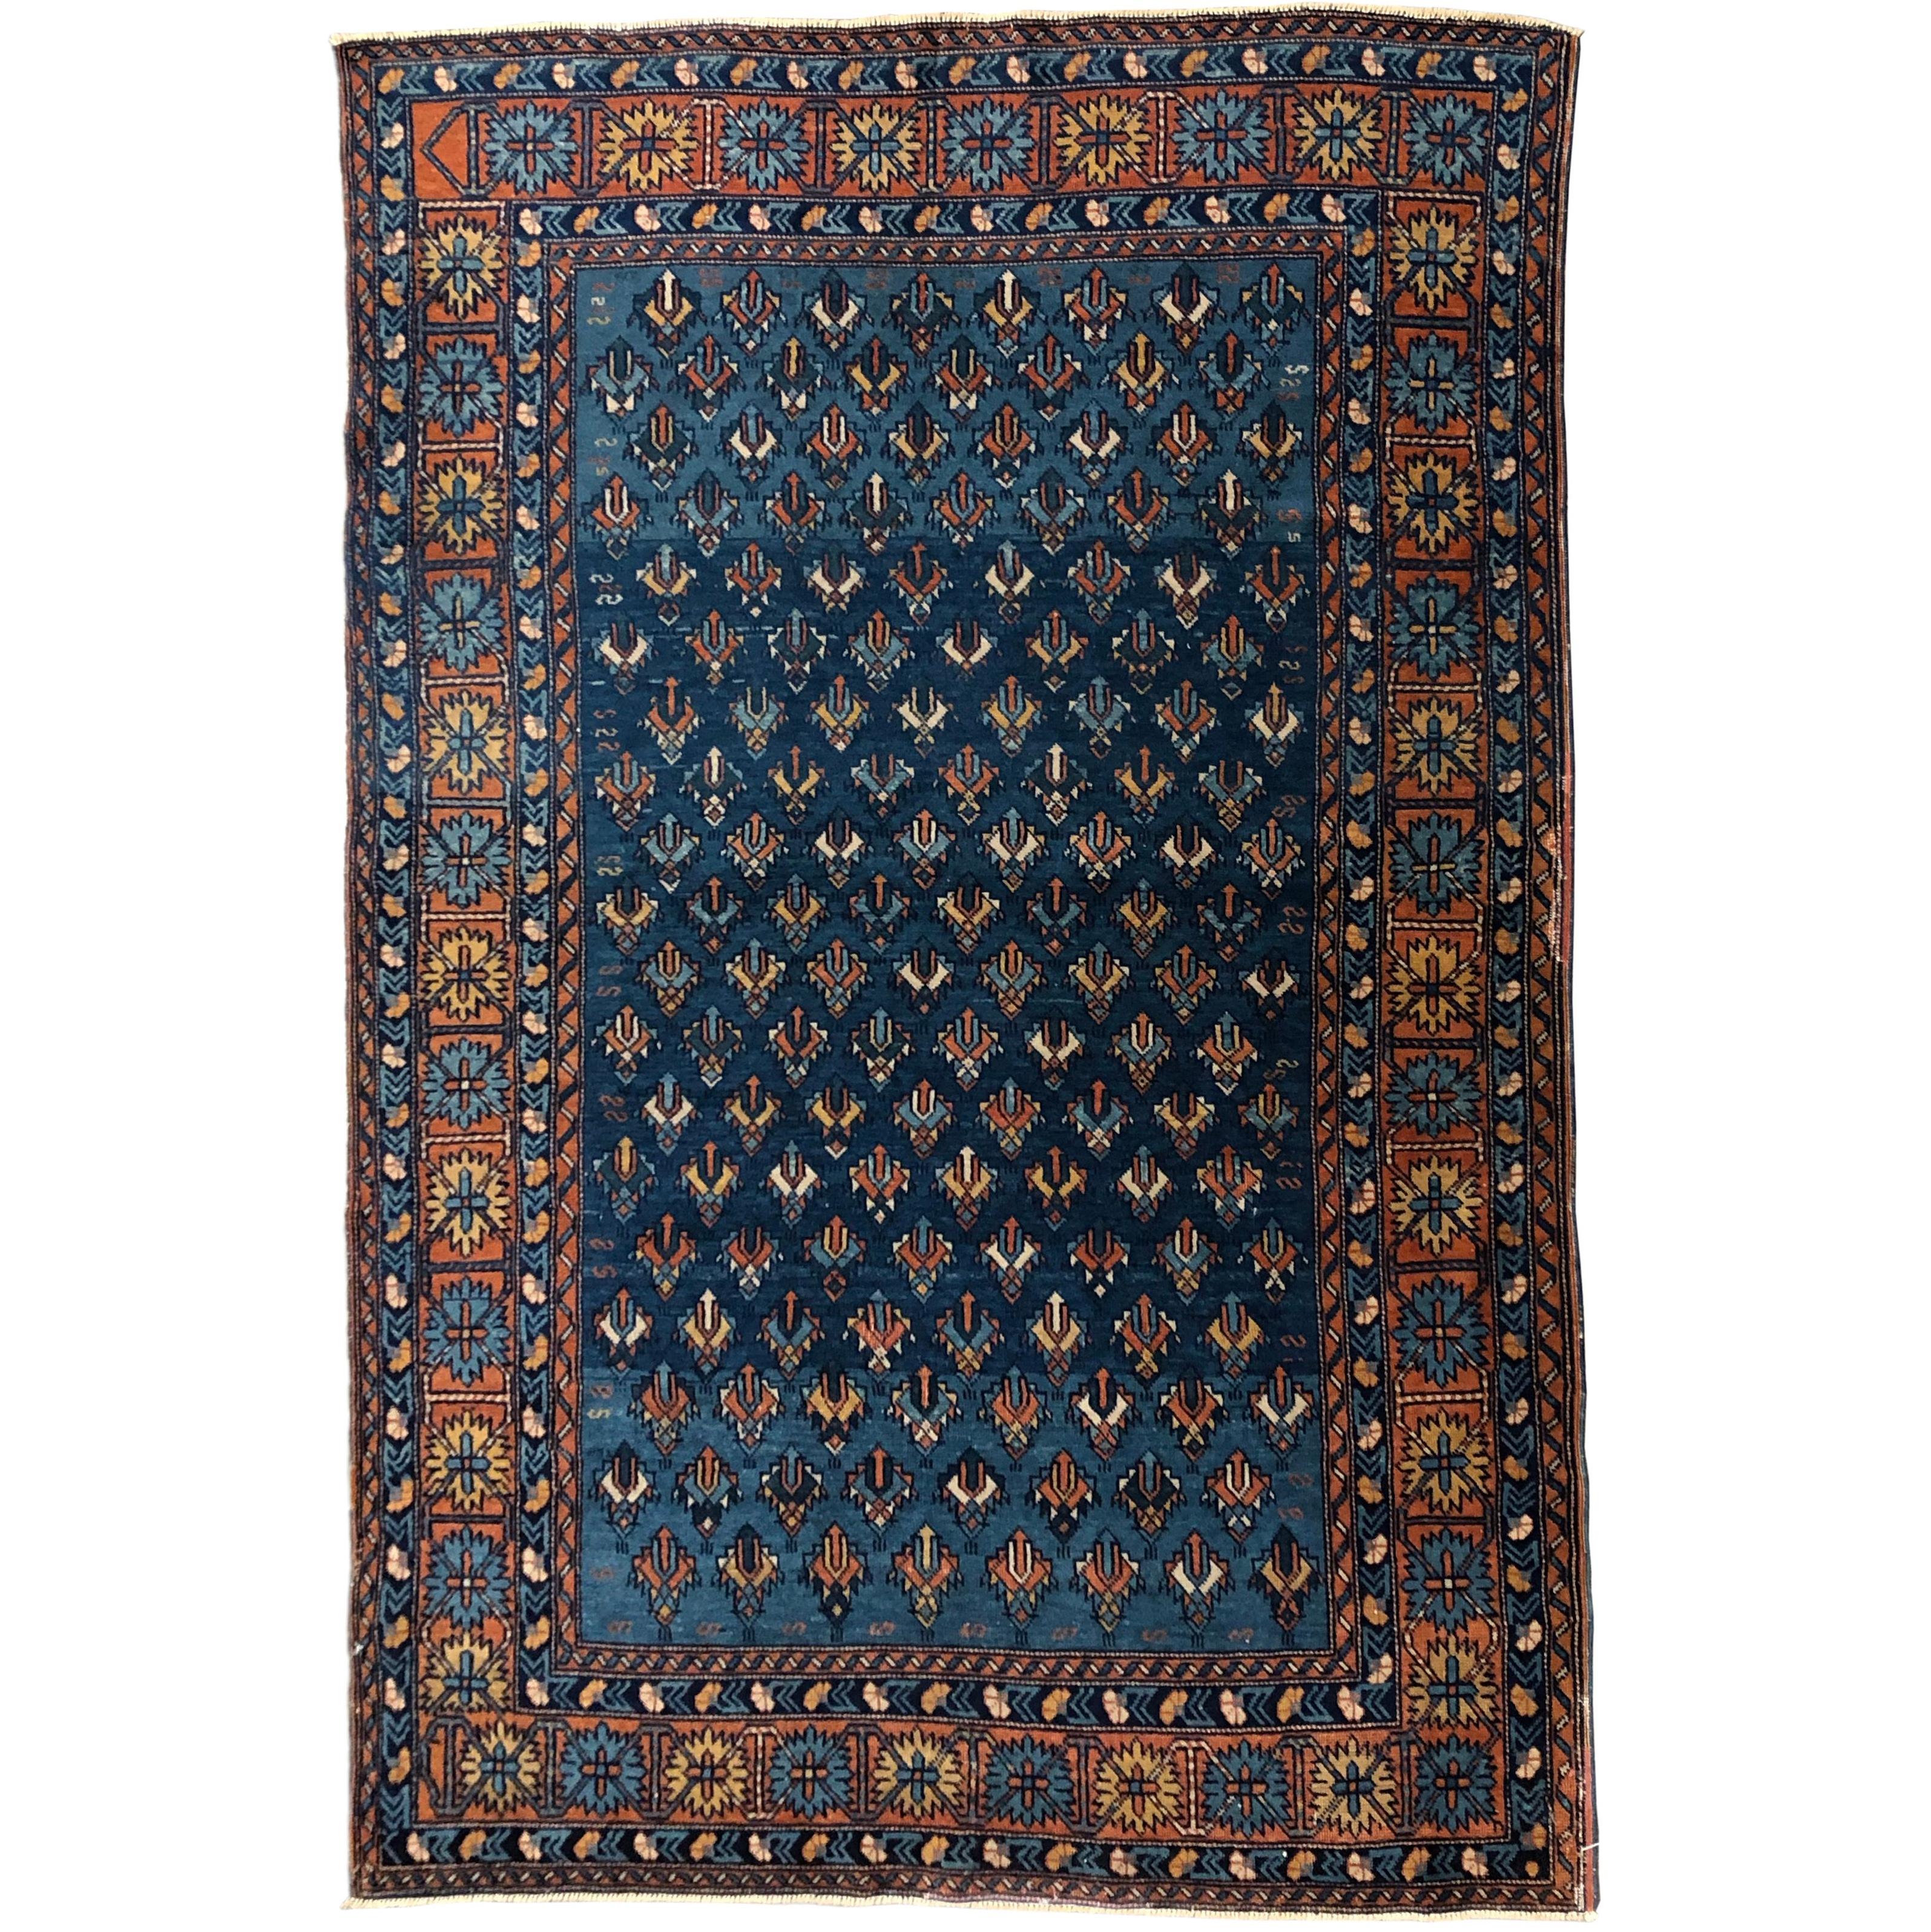 Antique Yerevan Accent Rug with Tribal Style, Antique Russian Armenian Rug